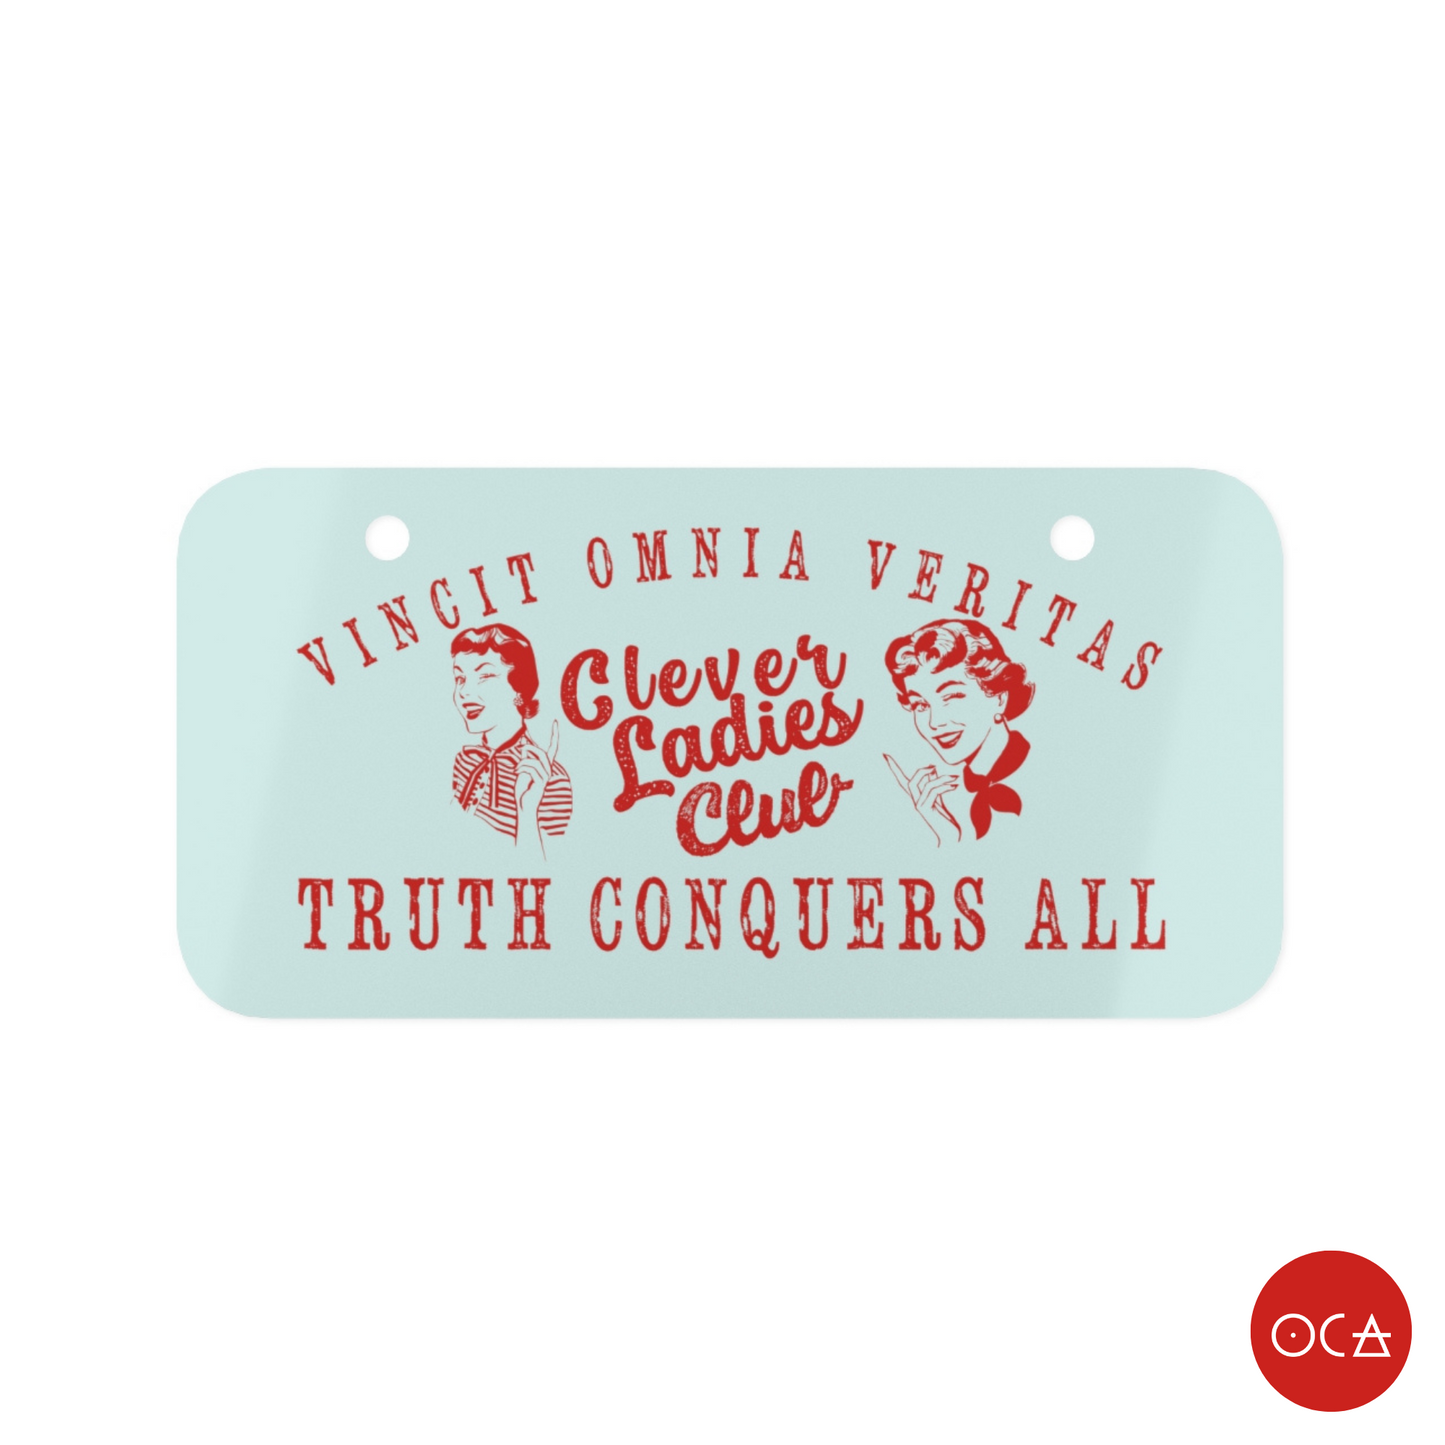 Clever Ladies Club Truth License Plate (Bike/Motorcycle | 2 Colors)